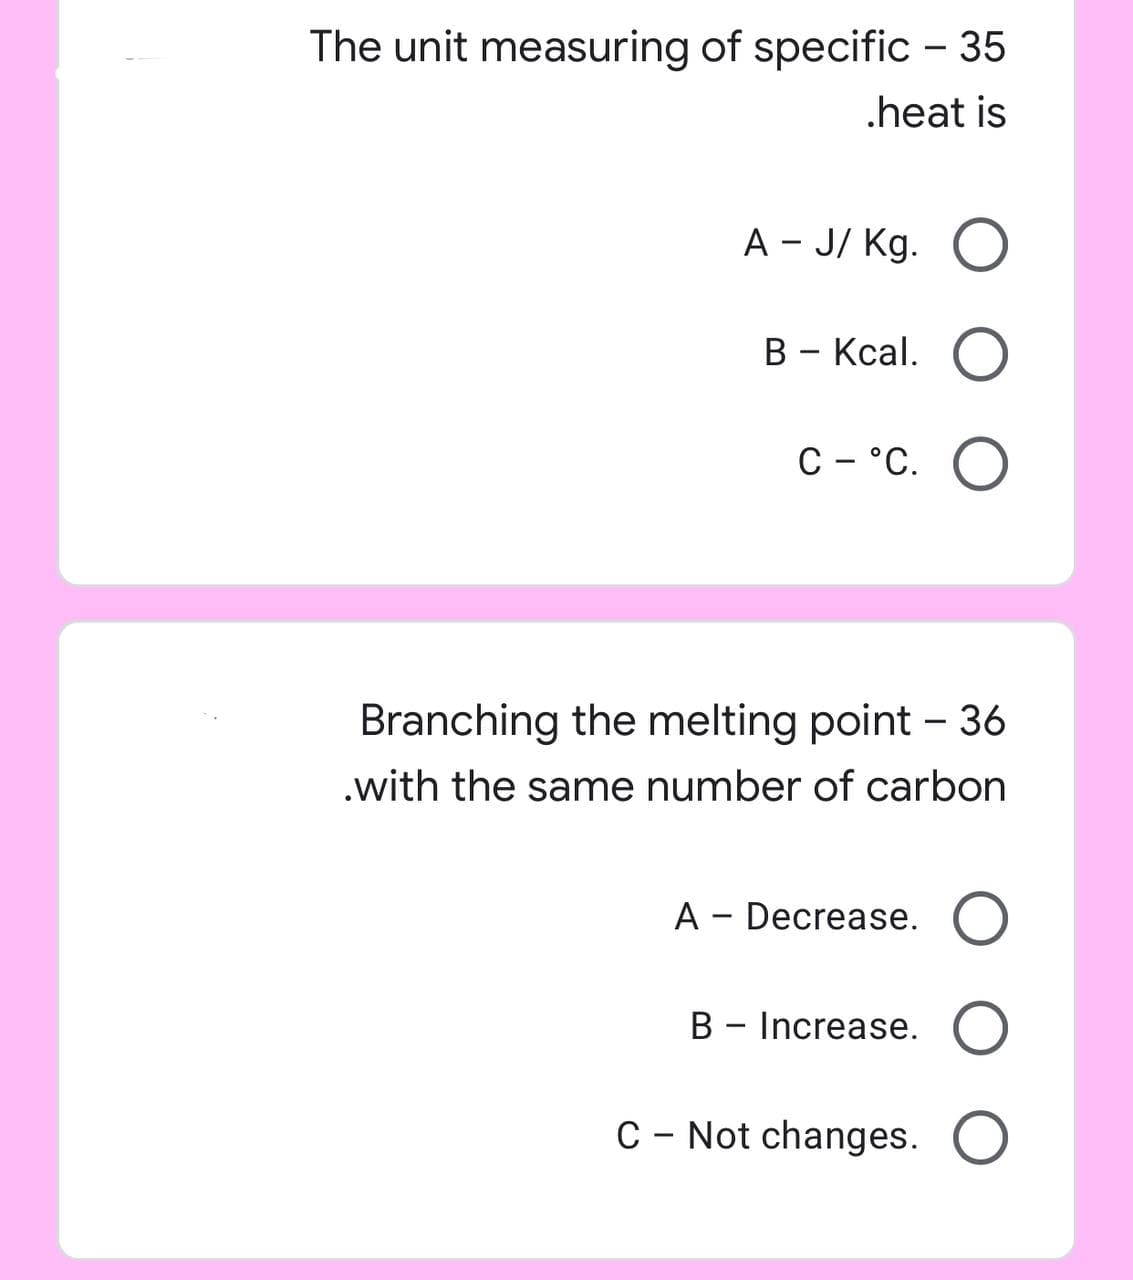 The unit measuring of specific - 35
.heat is
A - J/Kg. O
B - Kcal. O
C- °C. O
Branching the melting point - 36
.with the same number of carbon
A - Decrease. O
B - Increase. O
C - Not changes. O